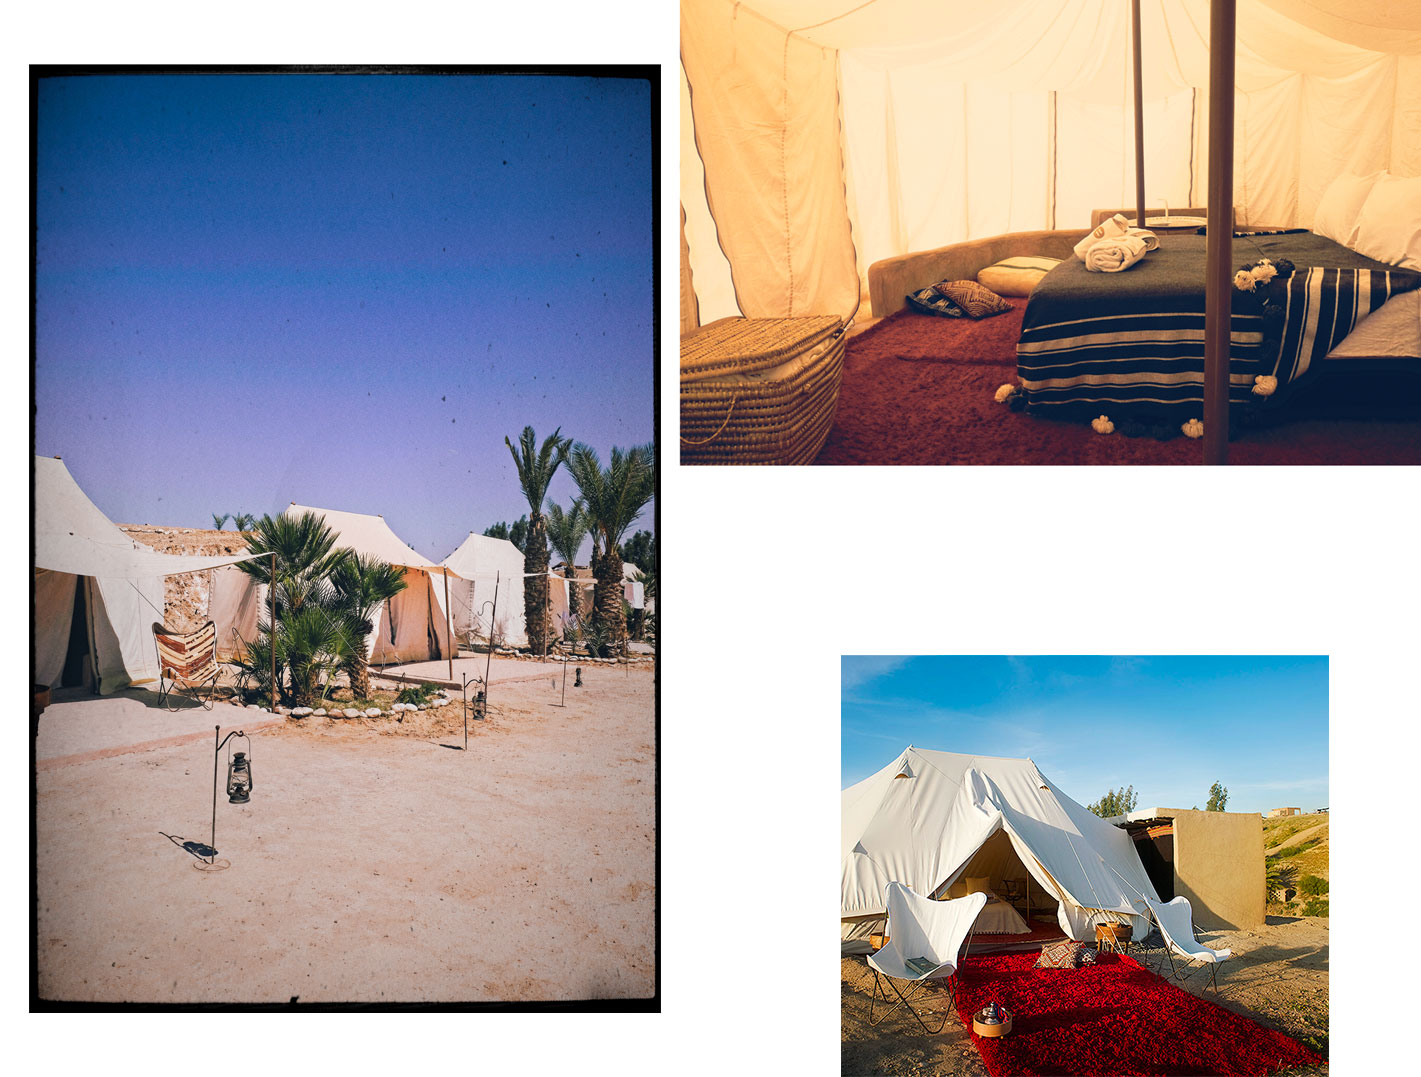 Exclusive tents’ indoor and outdoor areas with views the Atlas mountain and Marrakesh Desert – La Pause, Morocco